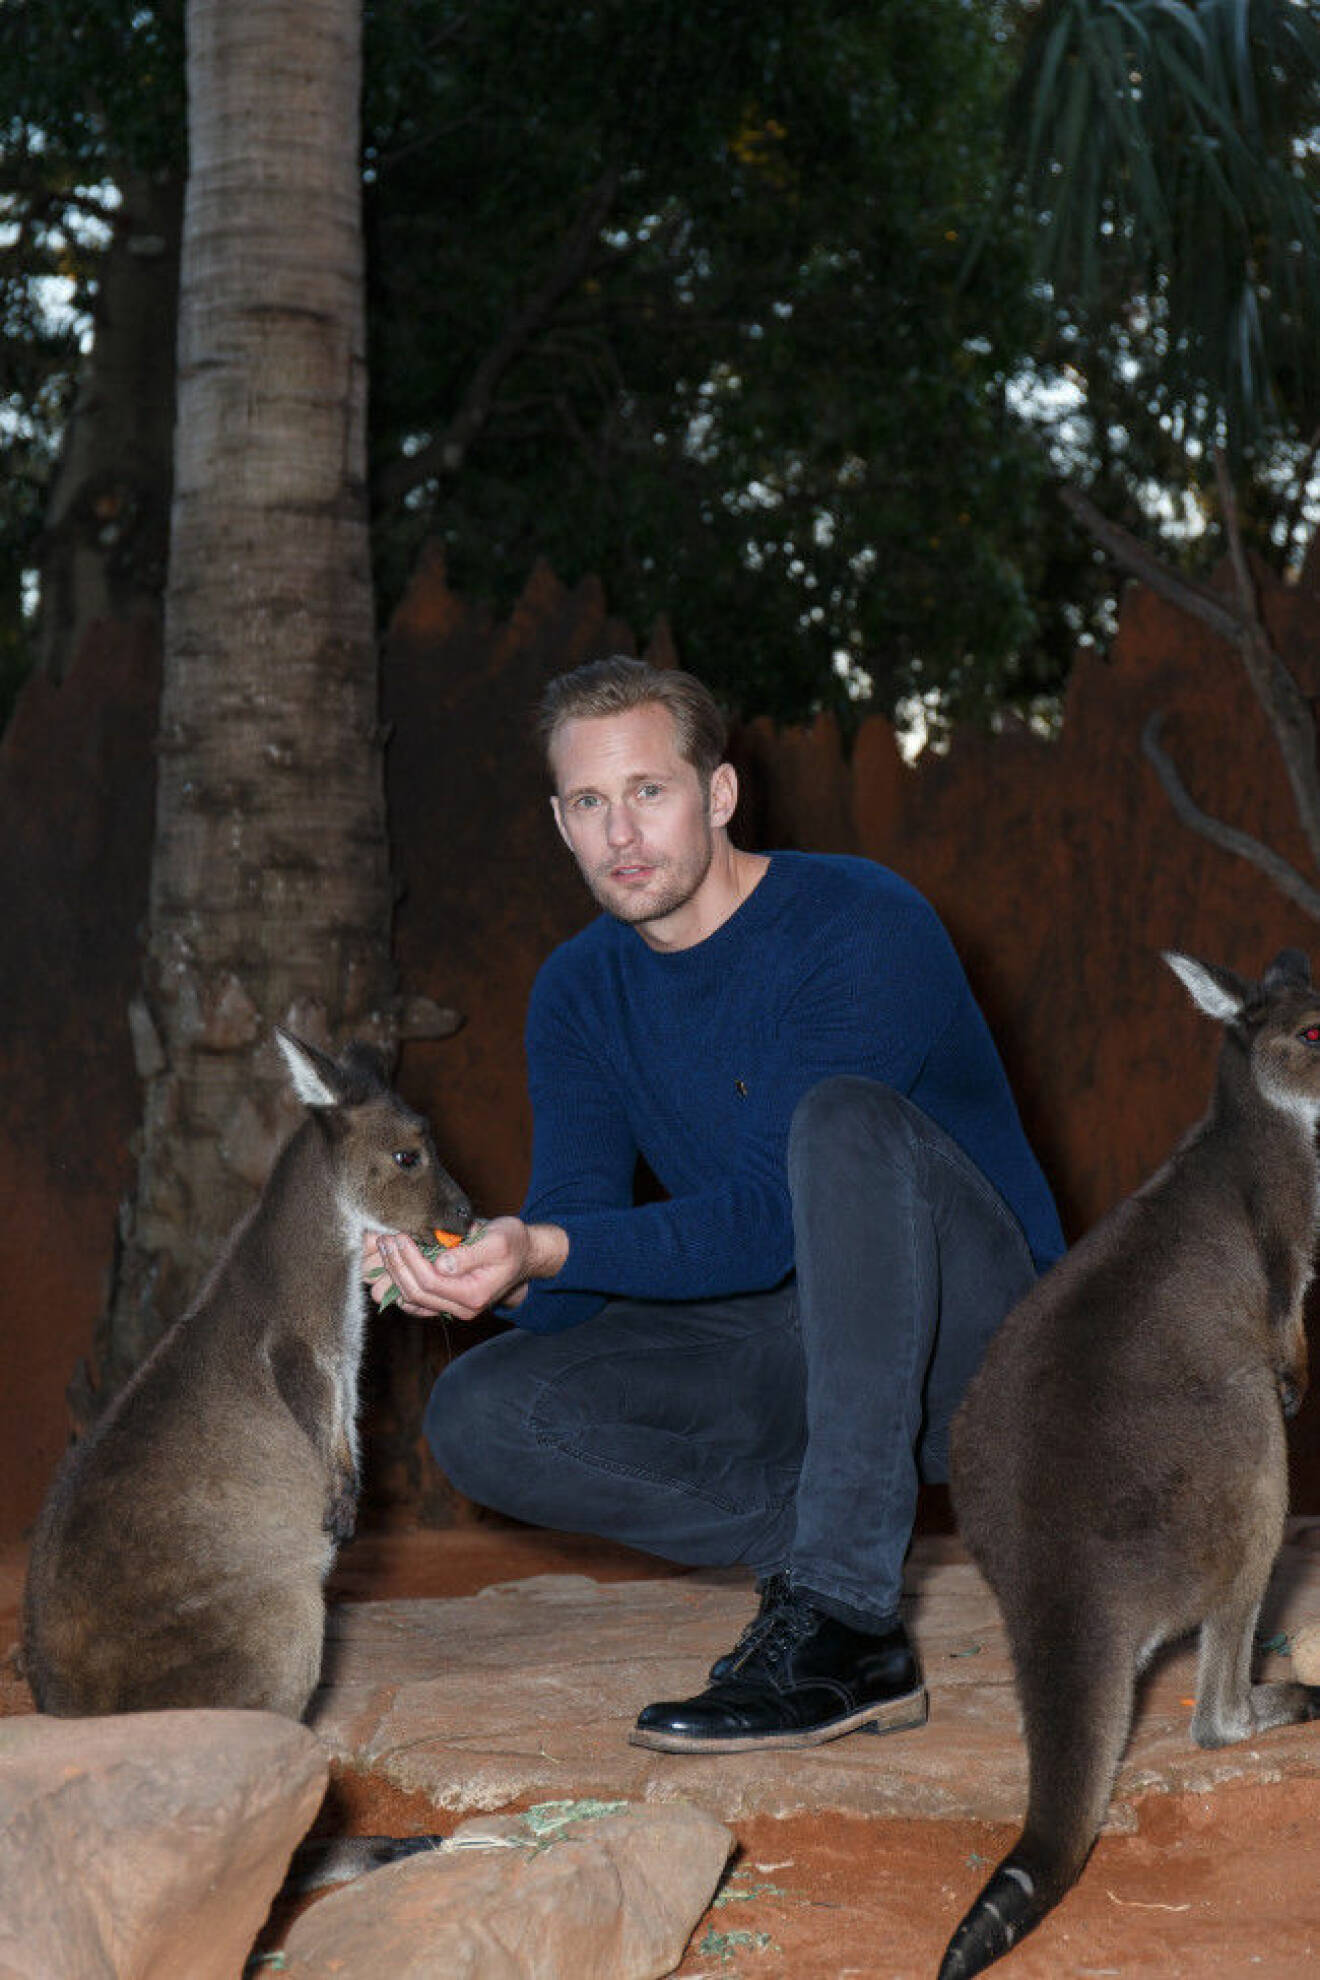 "The Legend of Tarzan" actor Alexander Skarsg?rd, who plays Tarzan in the film, greets native Australian wildlife at Sydney Zoo. Alexander is photographed with baby kangaroos, a python, and an echidna. Pictured: Alexander Skarsgard Ref: SPL1301610 140616 Picture by: Brandon Voight / Splash News Splash News and Pictures Los Angeles: 310-821-2666 New York: 212-619-2666 London: 870-934-2666 photodesk@splashnews.com 